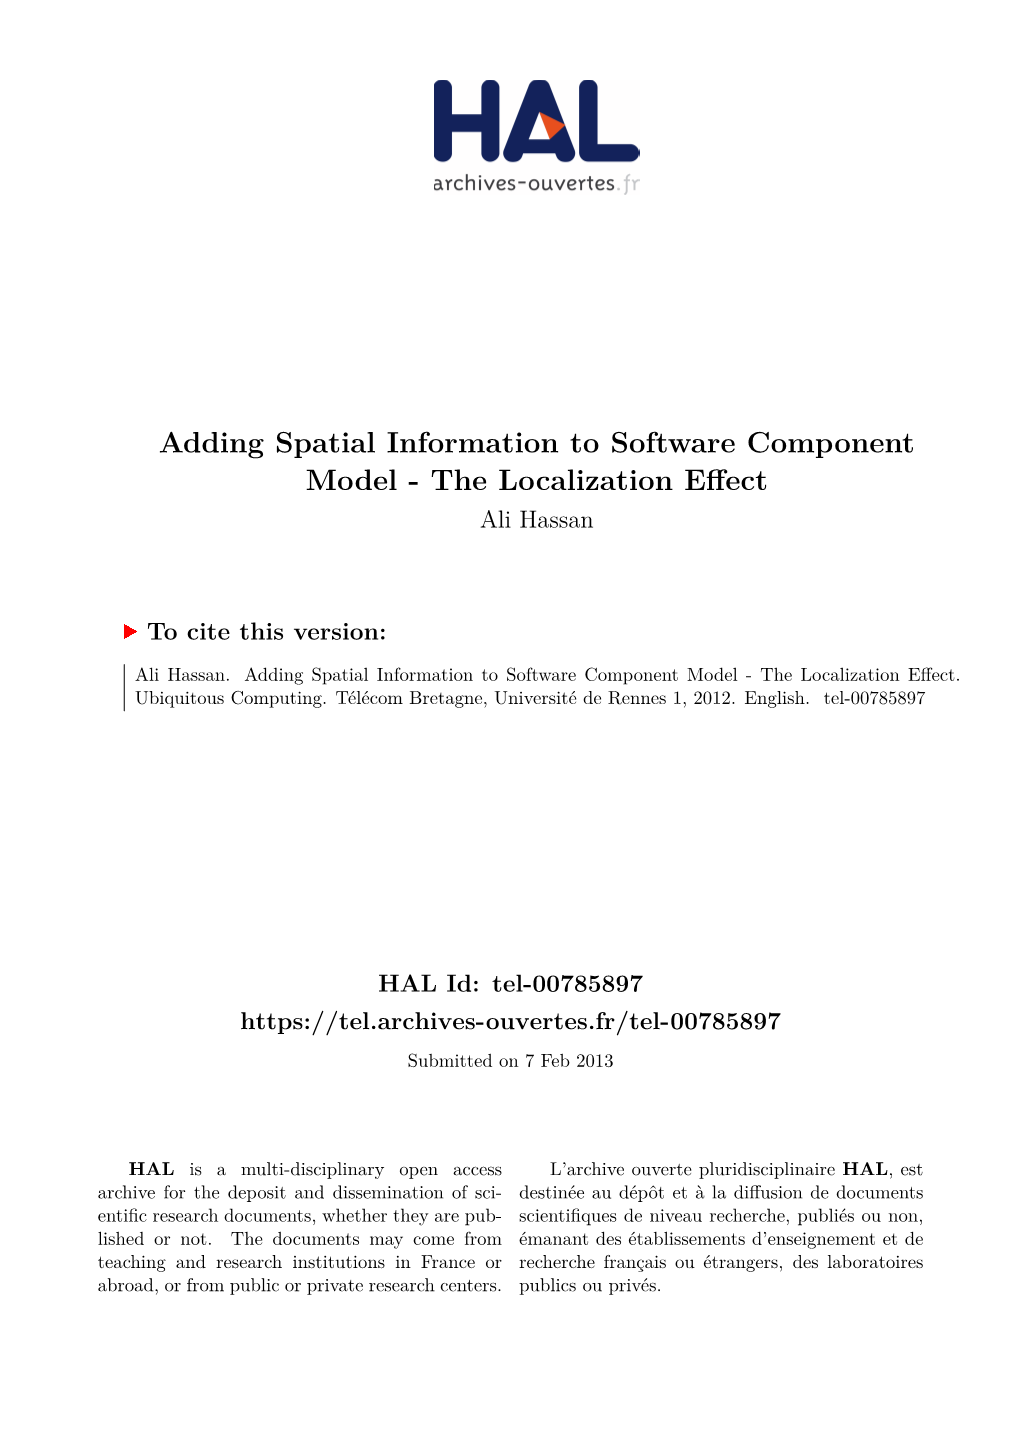 Adding Spatial Information to Software Component Model - the Localization Effect Ali Hassan